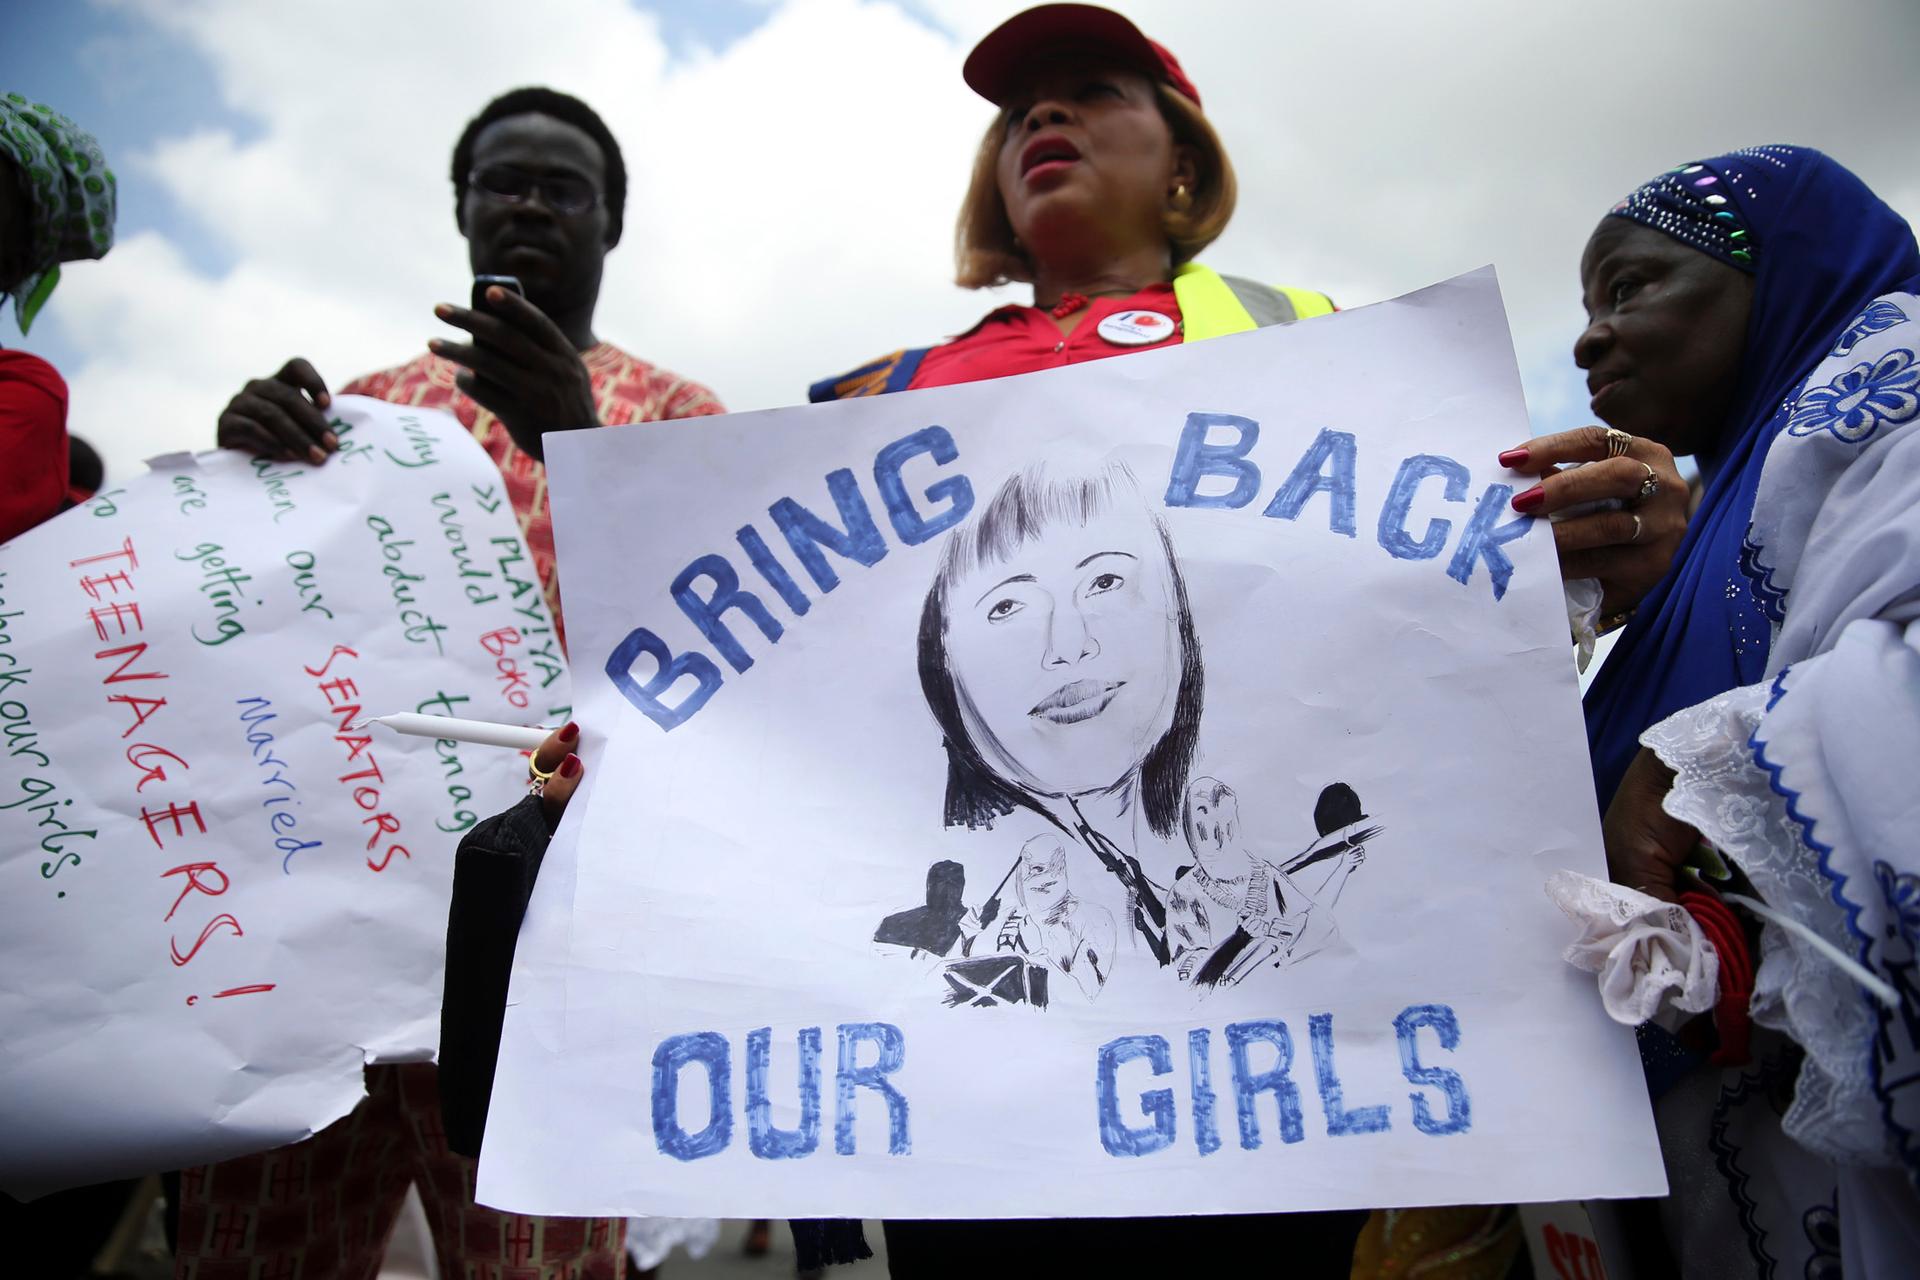 People take part in a protest demanding the release of abducted secondary school girls from the remote village of Chibok, Nigeria. The Islamist militant group Boko Haram claimed responsibility for the abduction of more than 200 schoolgirls 